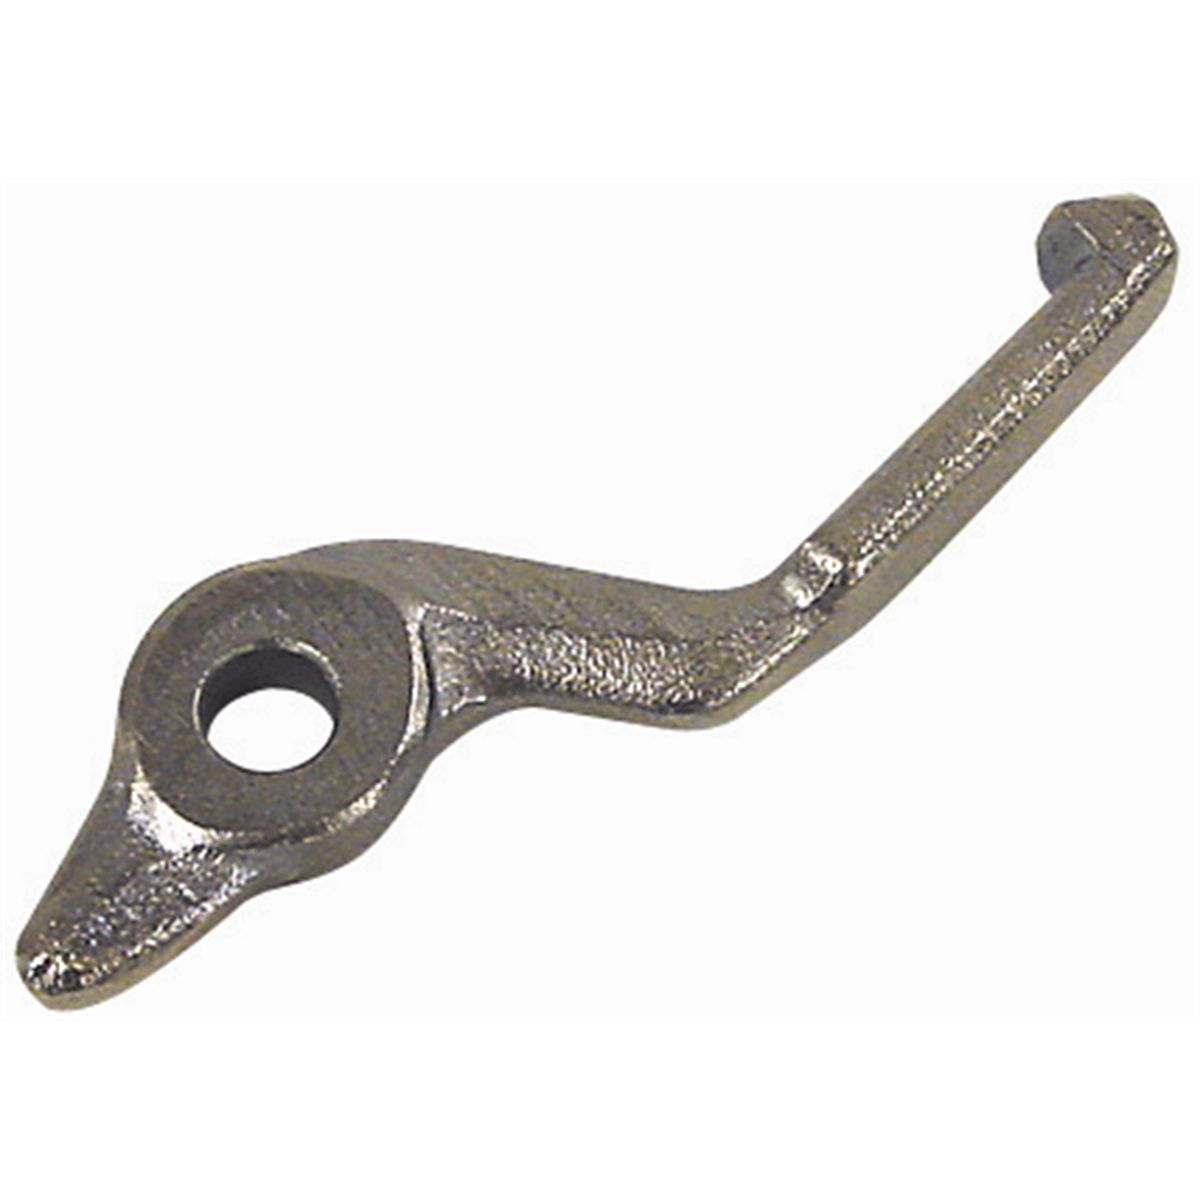 Replacement Leg for 3 Jaw Puller